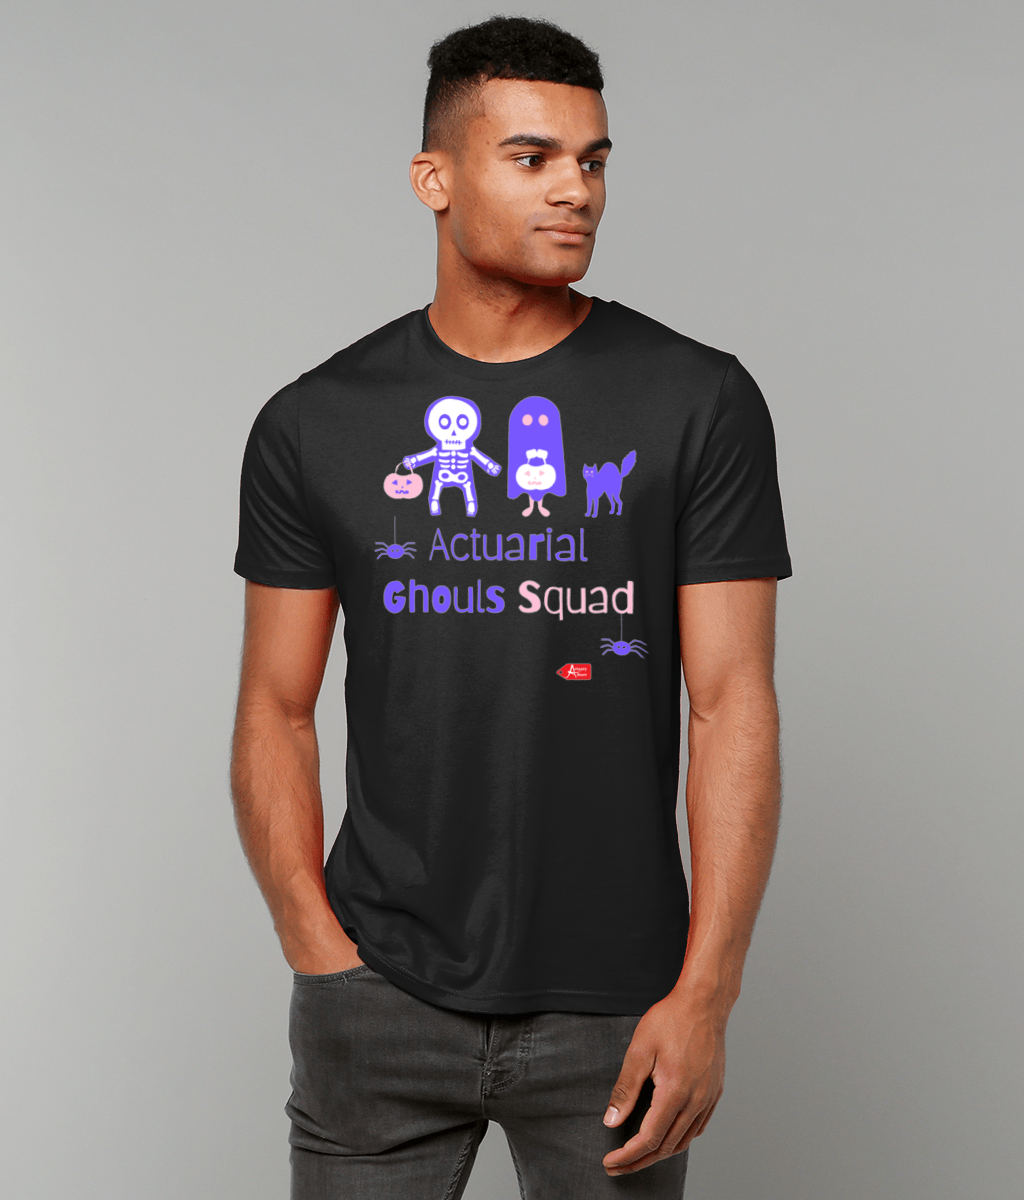 Actuarial Ghouls Squad Cute Halloween T-Shirt